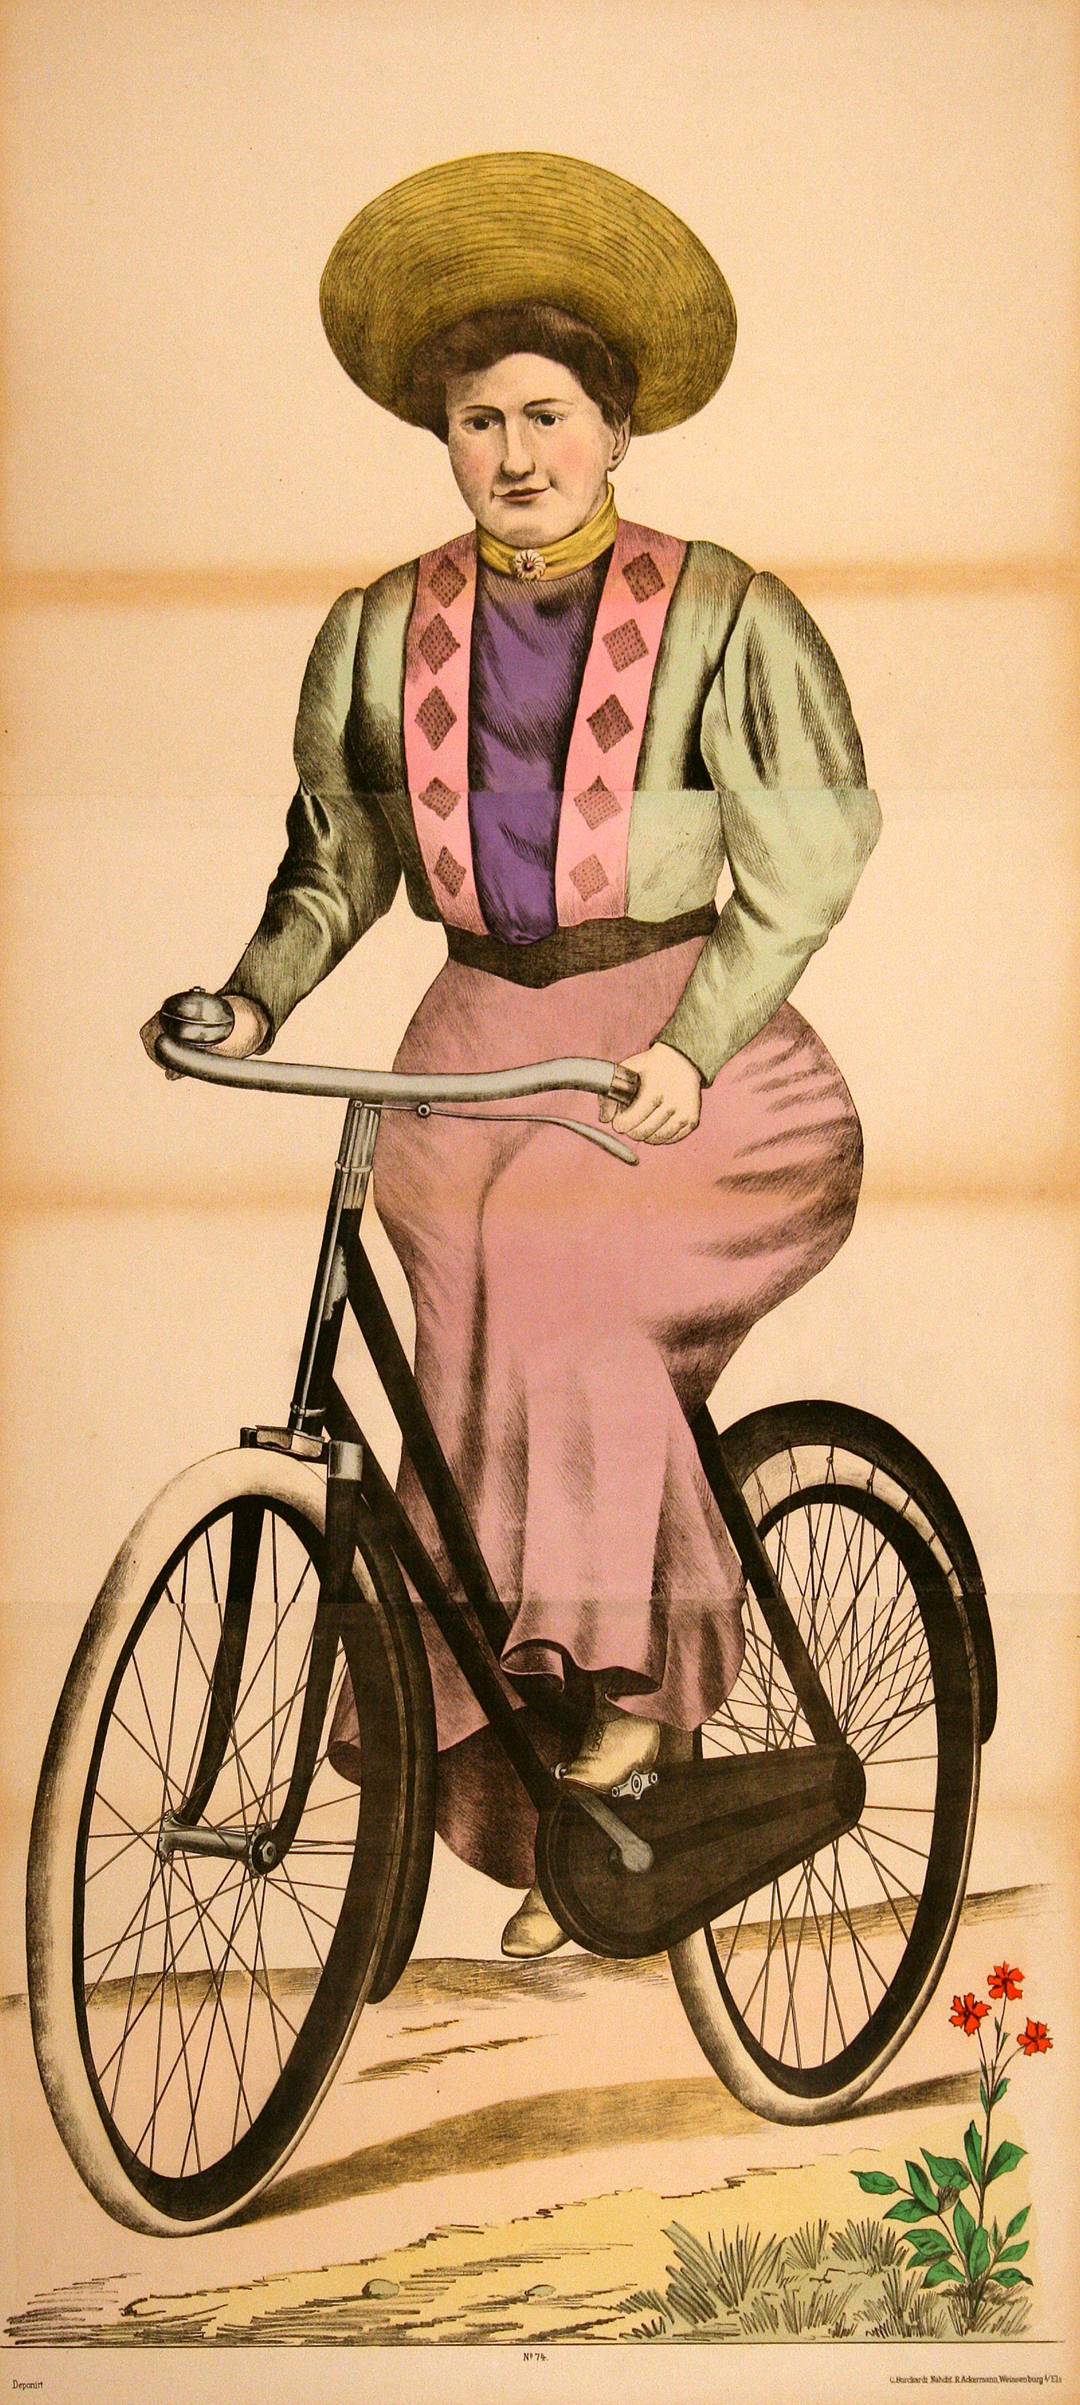 Original C1880 Woman on Bicycle Poster - Wissembourg Collection